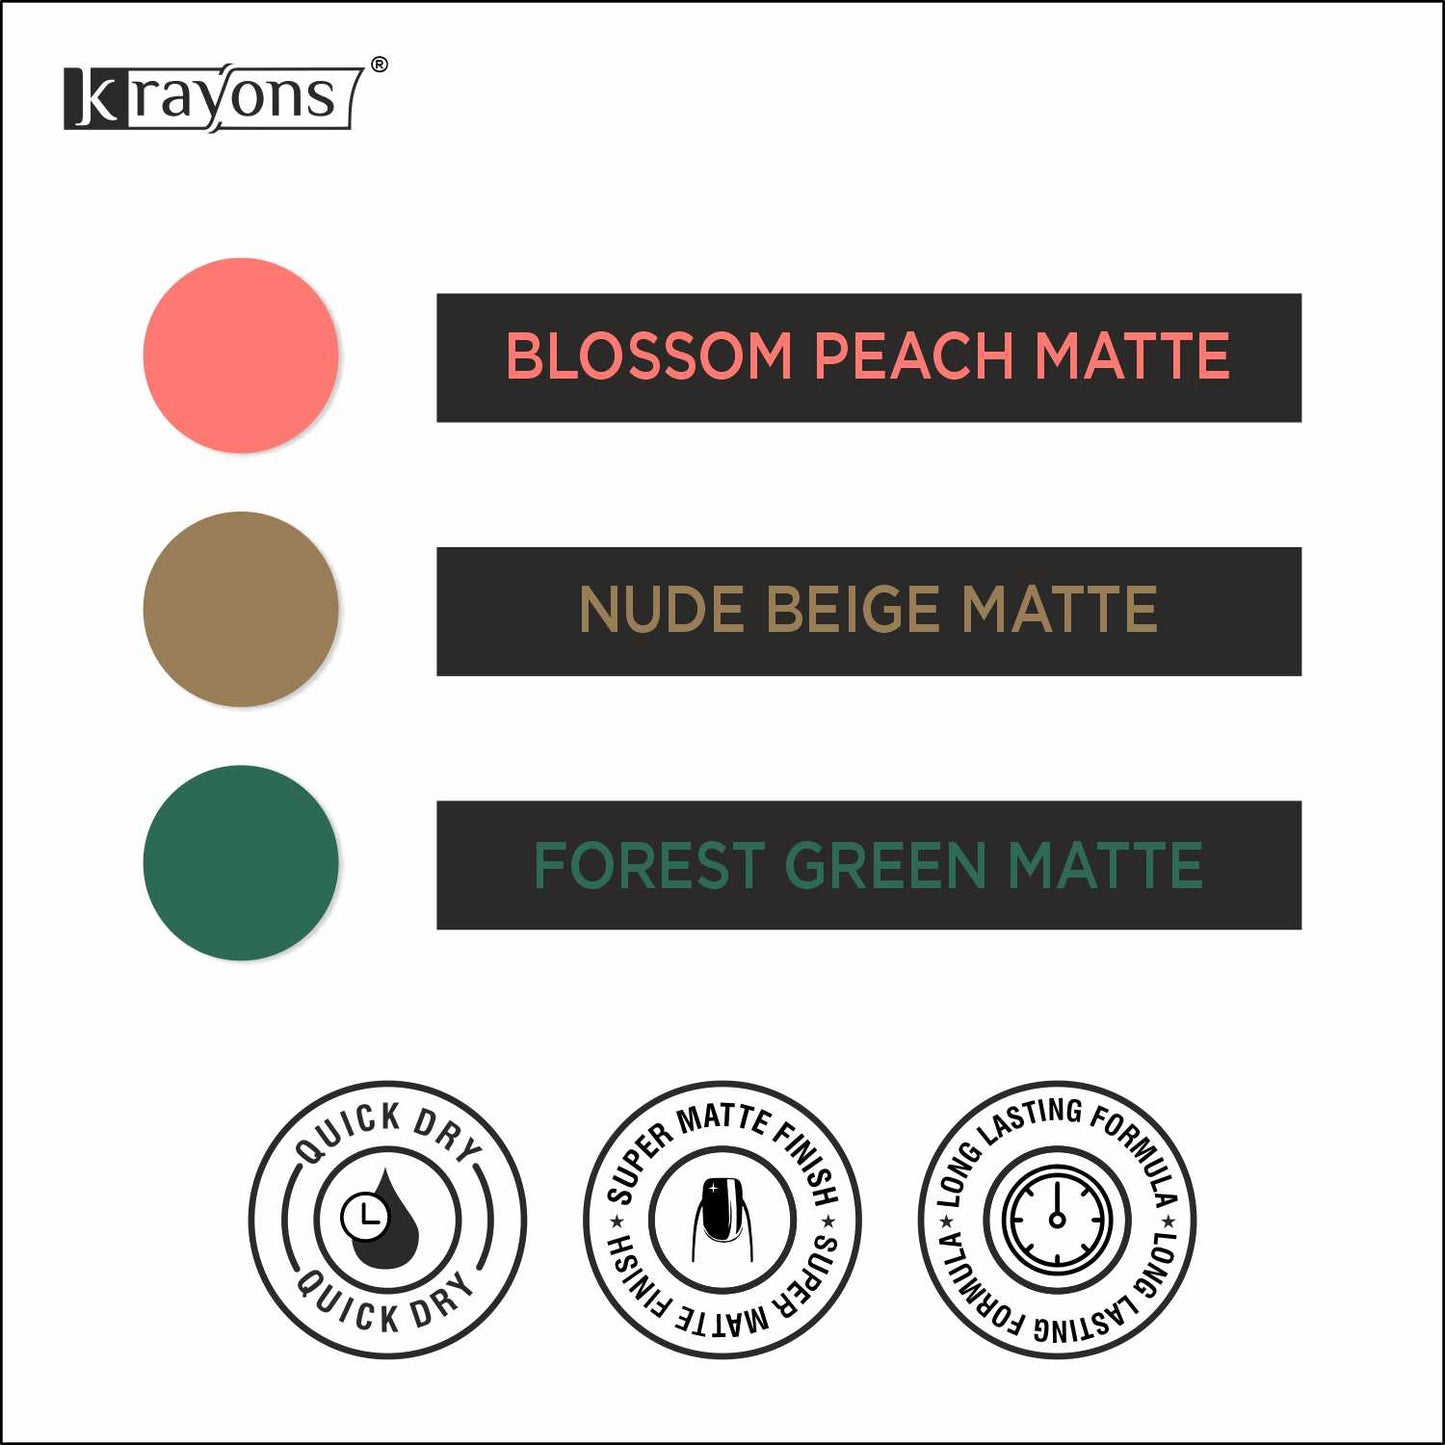 Krayons Cute Super Matte Finish Nail Enamel, Quick Dry, LongLasting, Blossom Peach, Nude Beige, Forest Green, 6ml Each (Pack of 3)